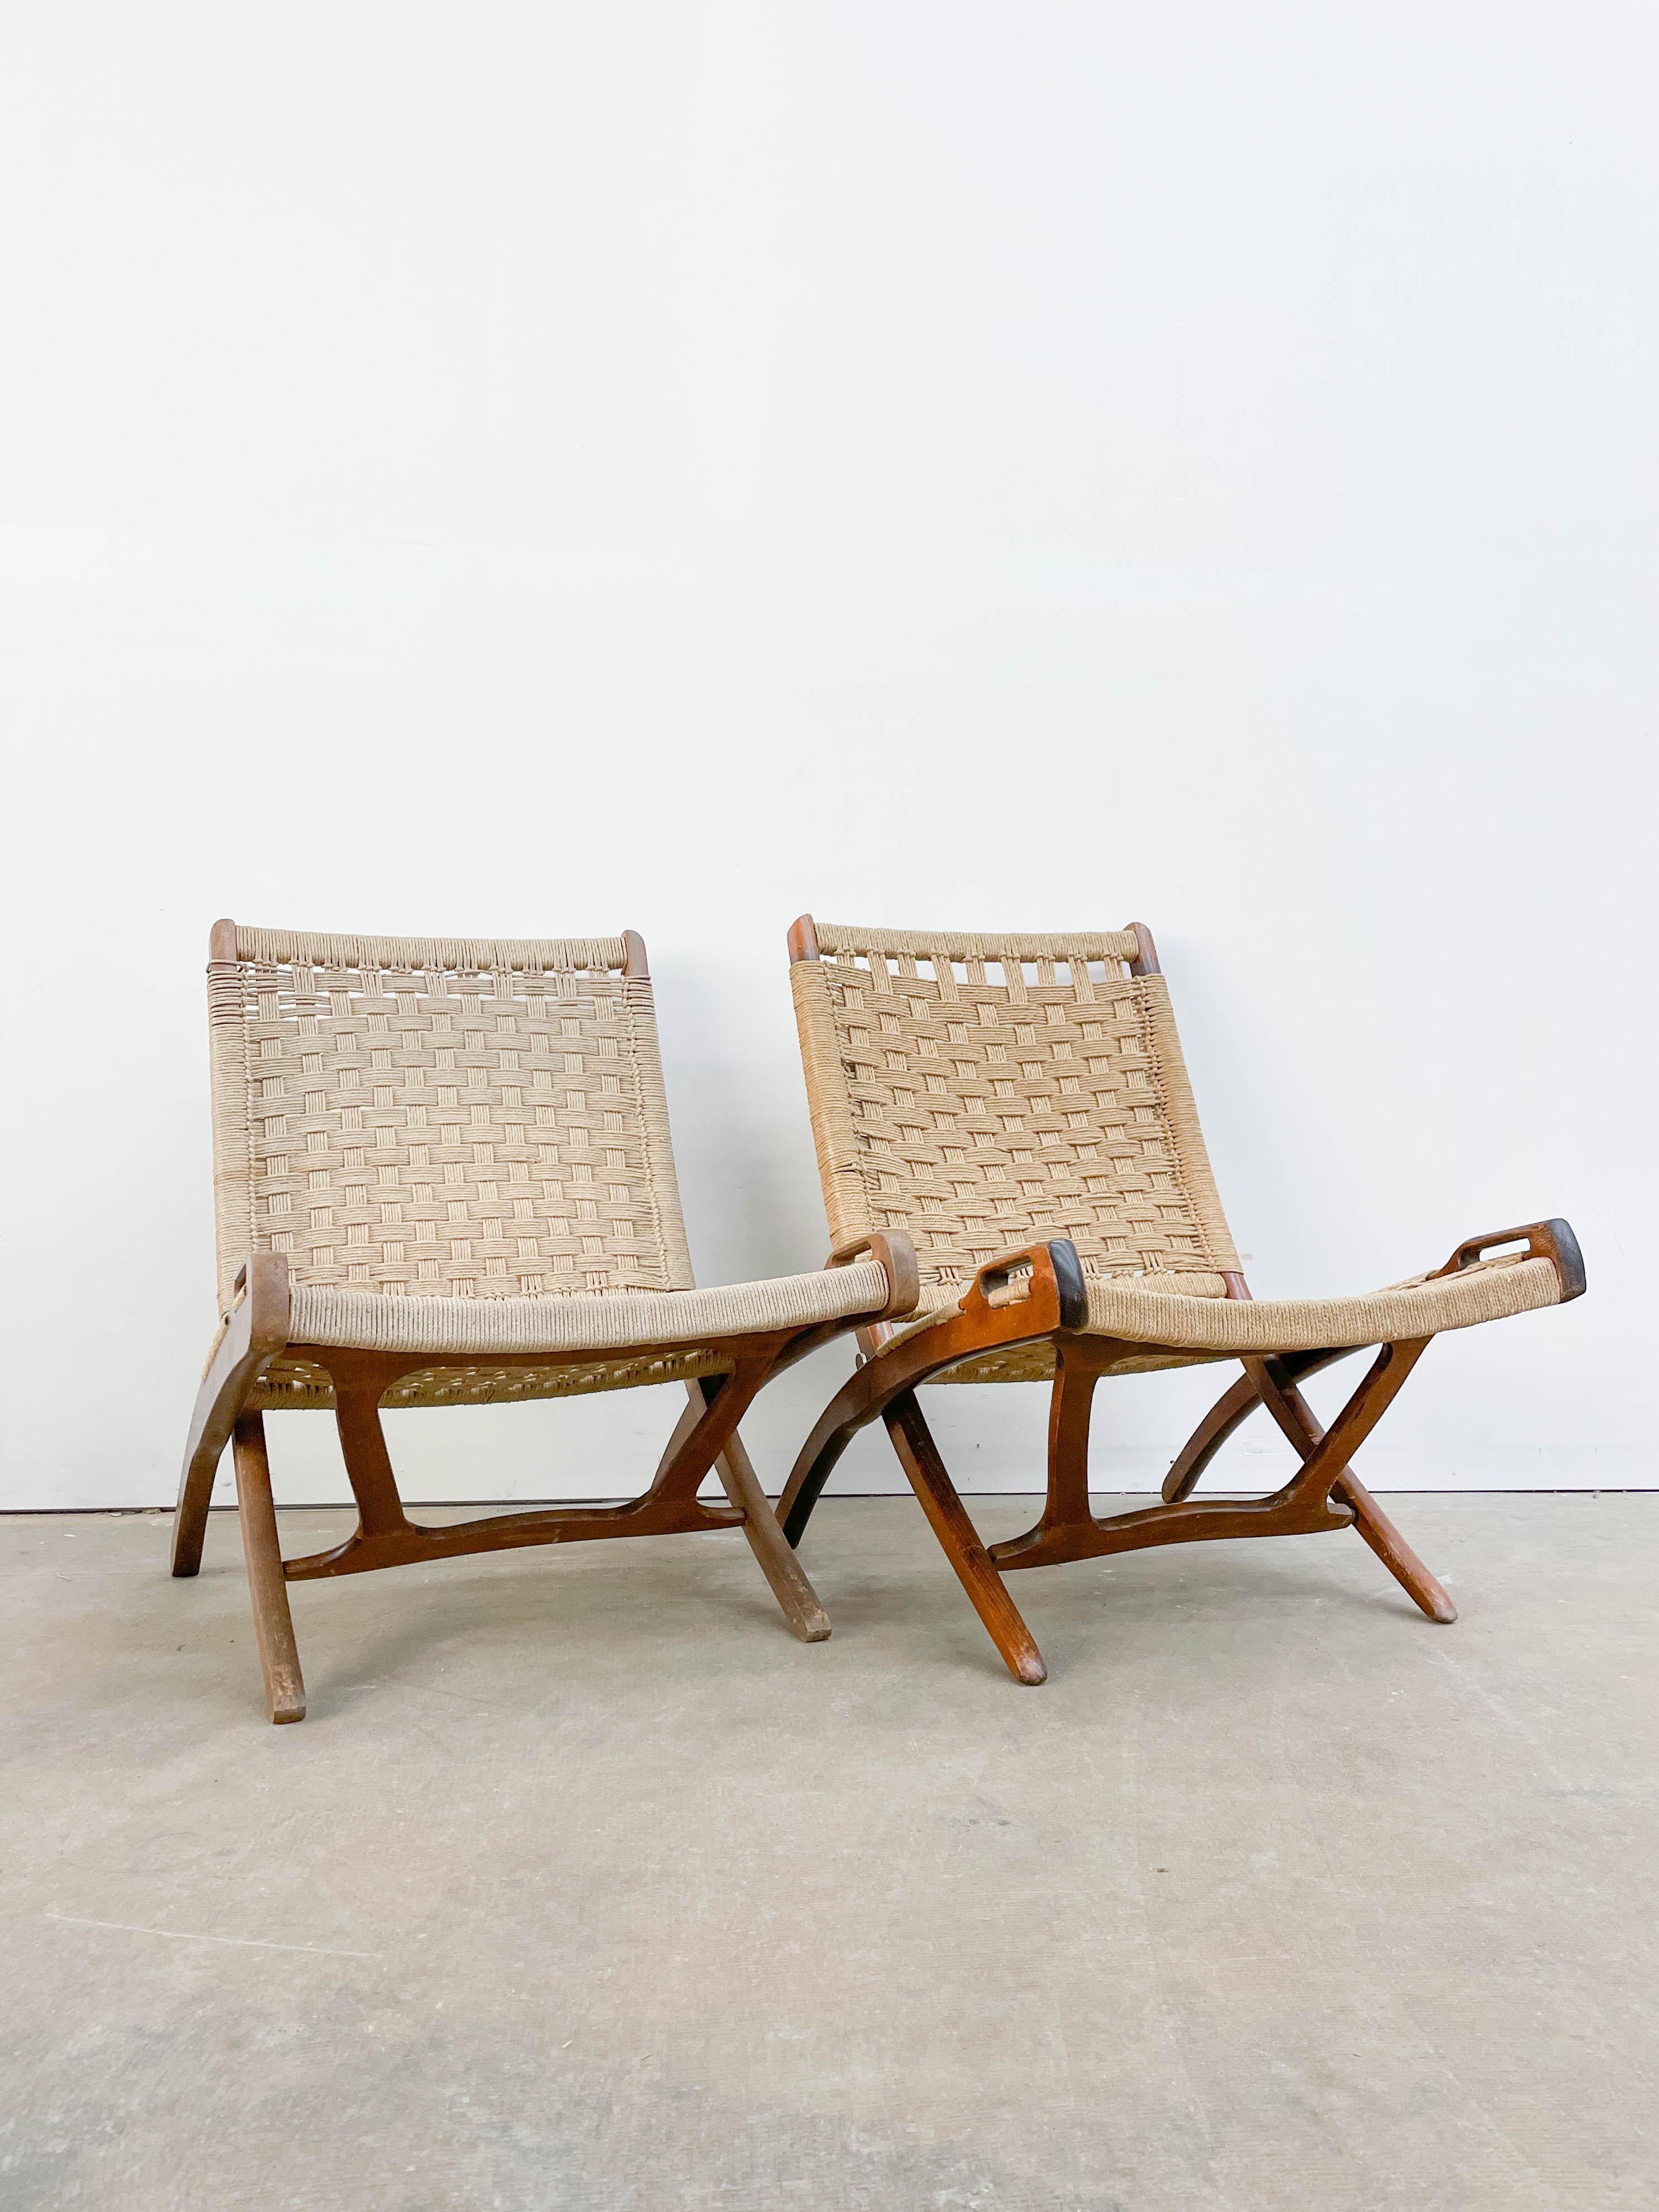 If this pair of popular folding chairs with rope seats and backs looks familiar, it is because it is closely based on Hans Wegner's famous chair design. This stunning pair of mid-century modern rope chairs looks just like Wegner's iconic chairs, and